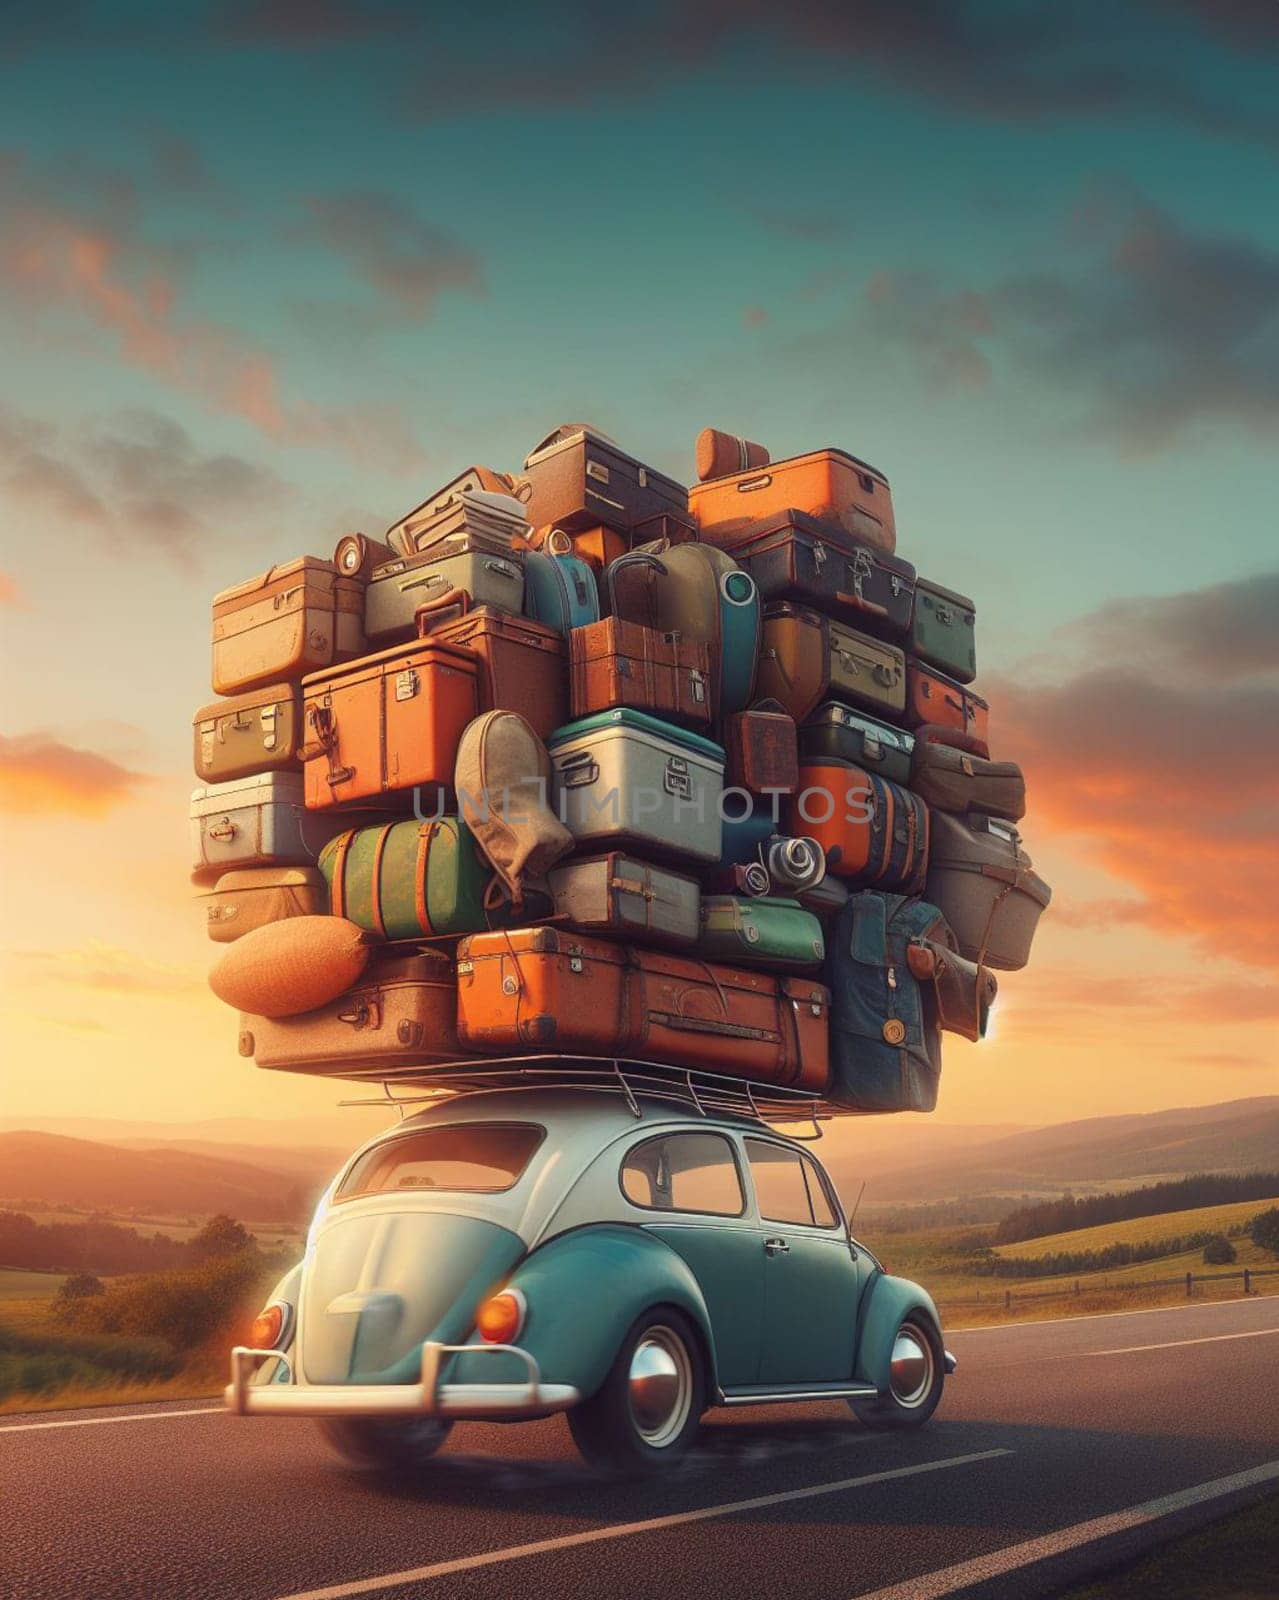 huge load luggage on roof of vintage car van t1 german Vacation traveling nomadic life on the road generated ai art